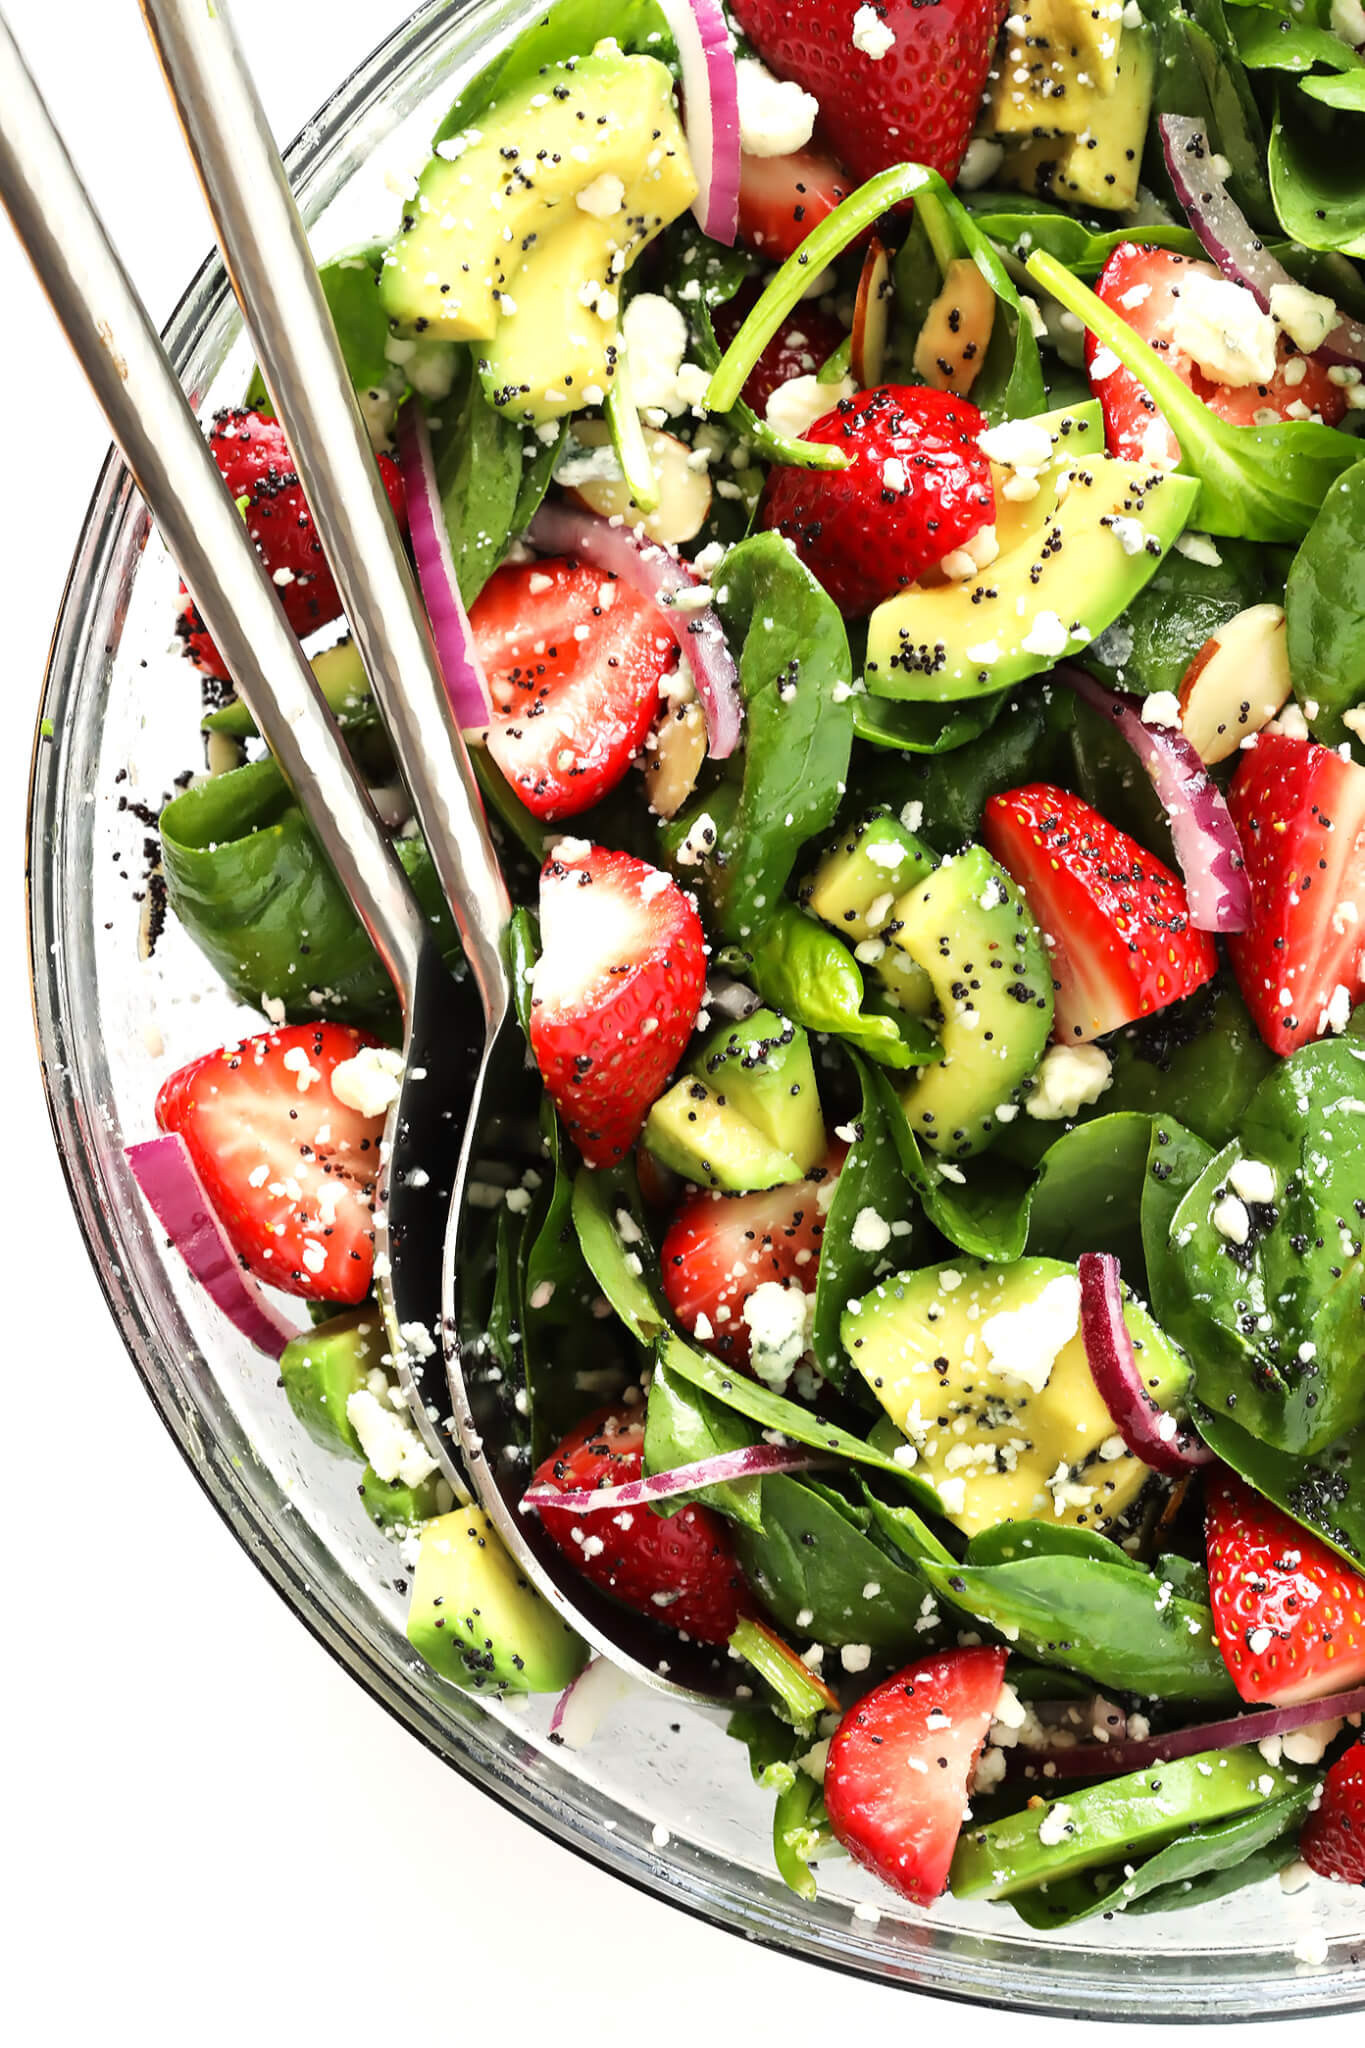 Spinach Salad Dressings Recipes
 Avocado Strawberry Spinach Salad with Poppyseed